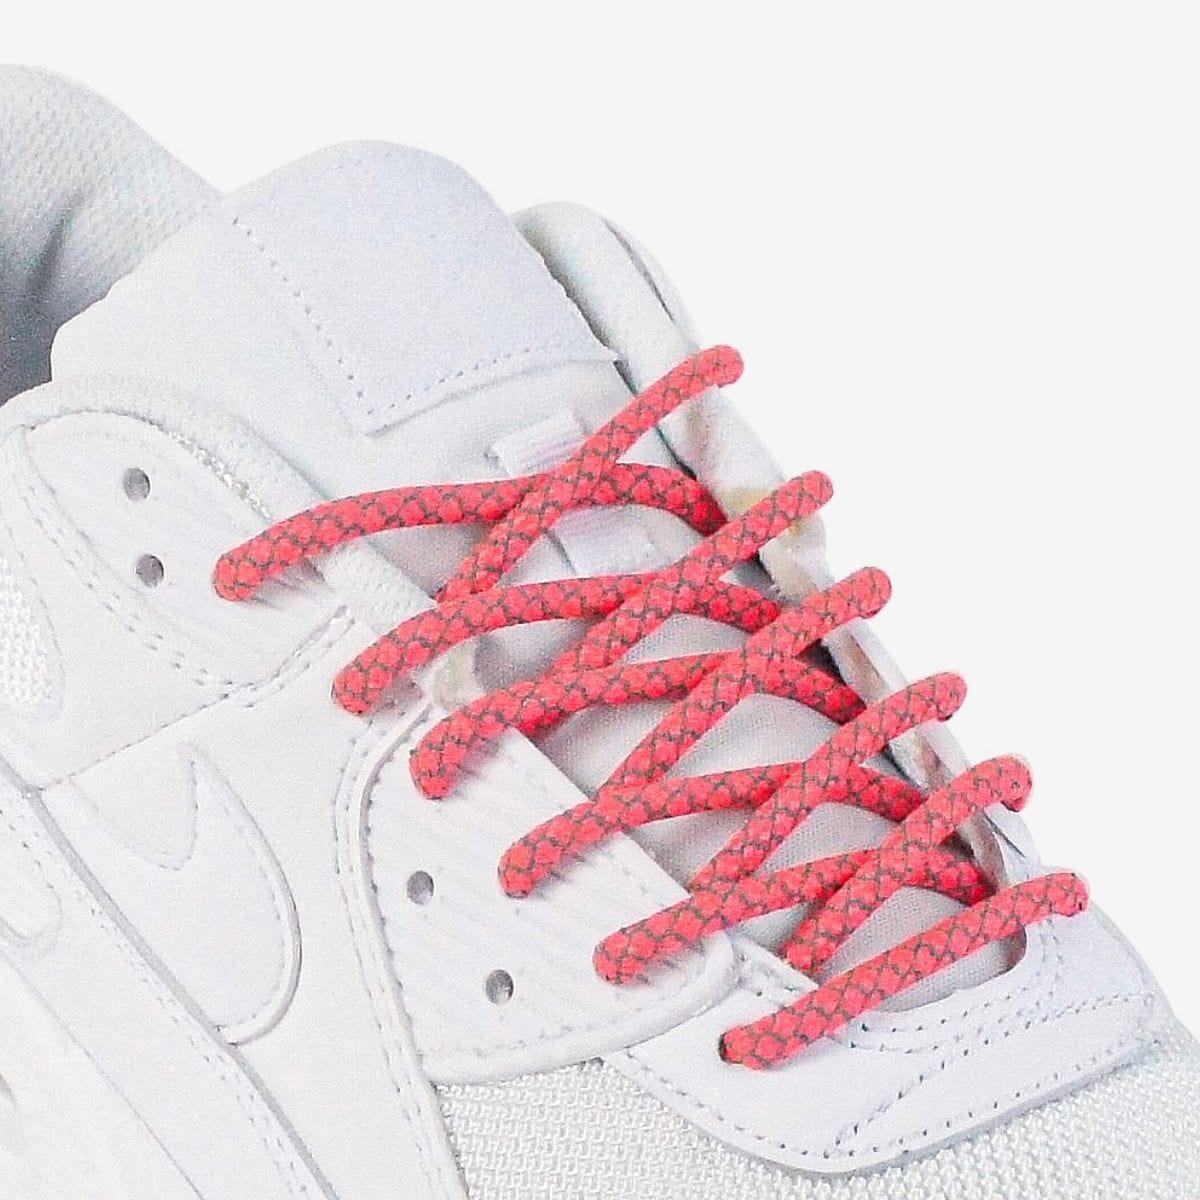 custom-color-shoelaces-on-white-sneakers-with-reflective-fluorescent-red-laces